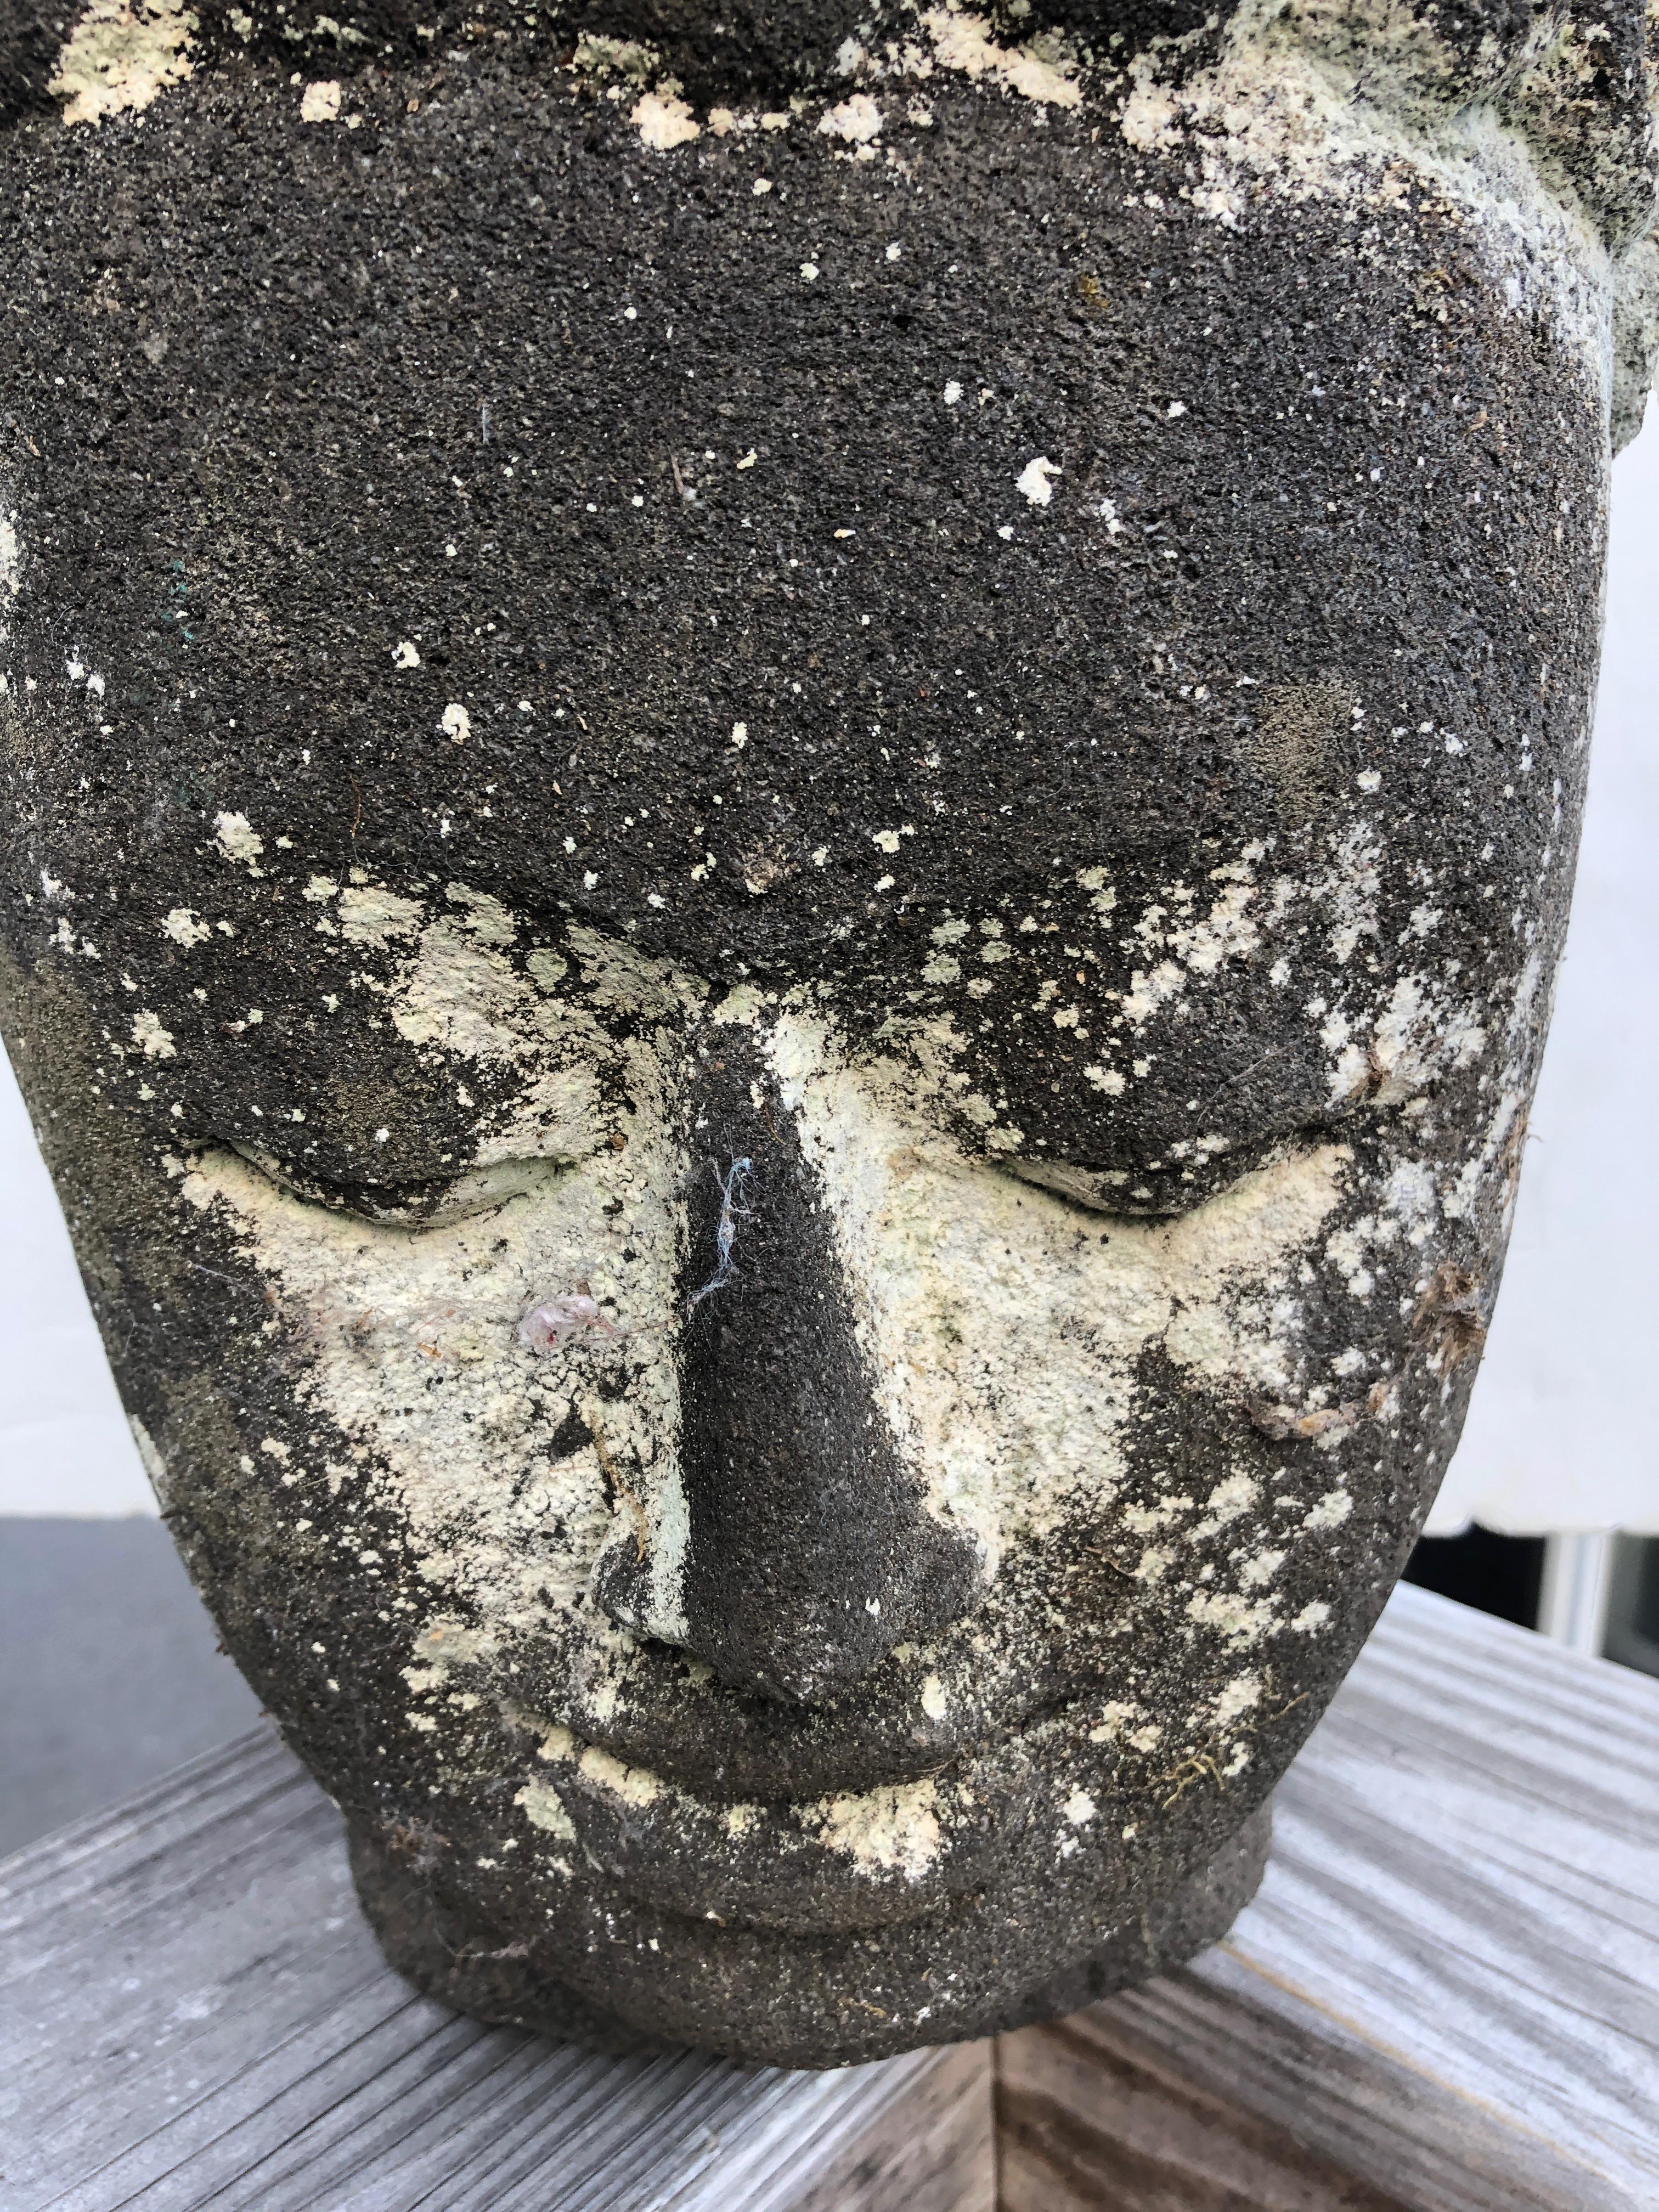 A gorgeous cast stone Buddha head for the garden or patio, large and artfully organically adorned with moss.